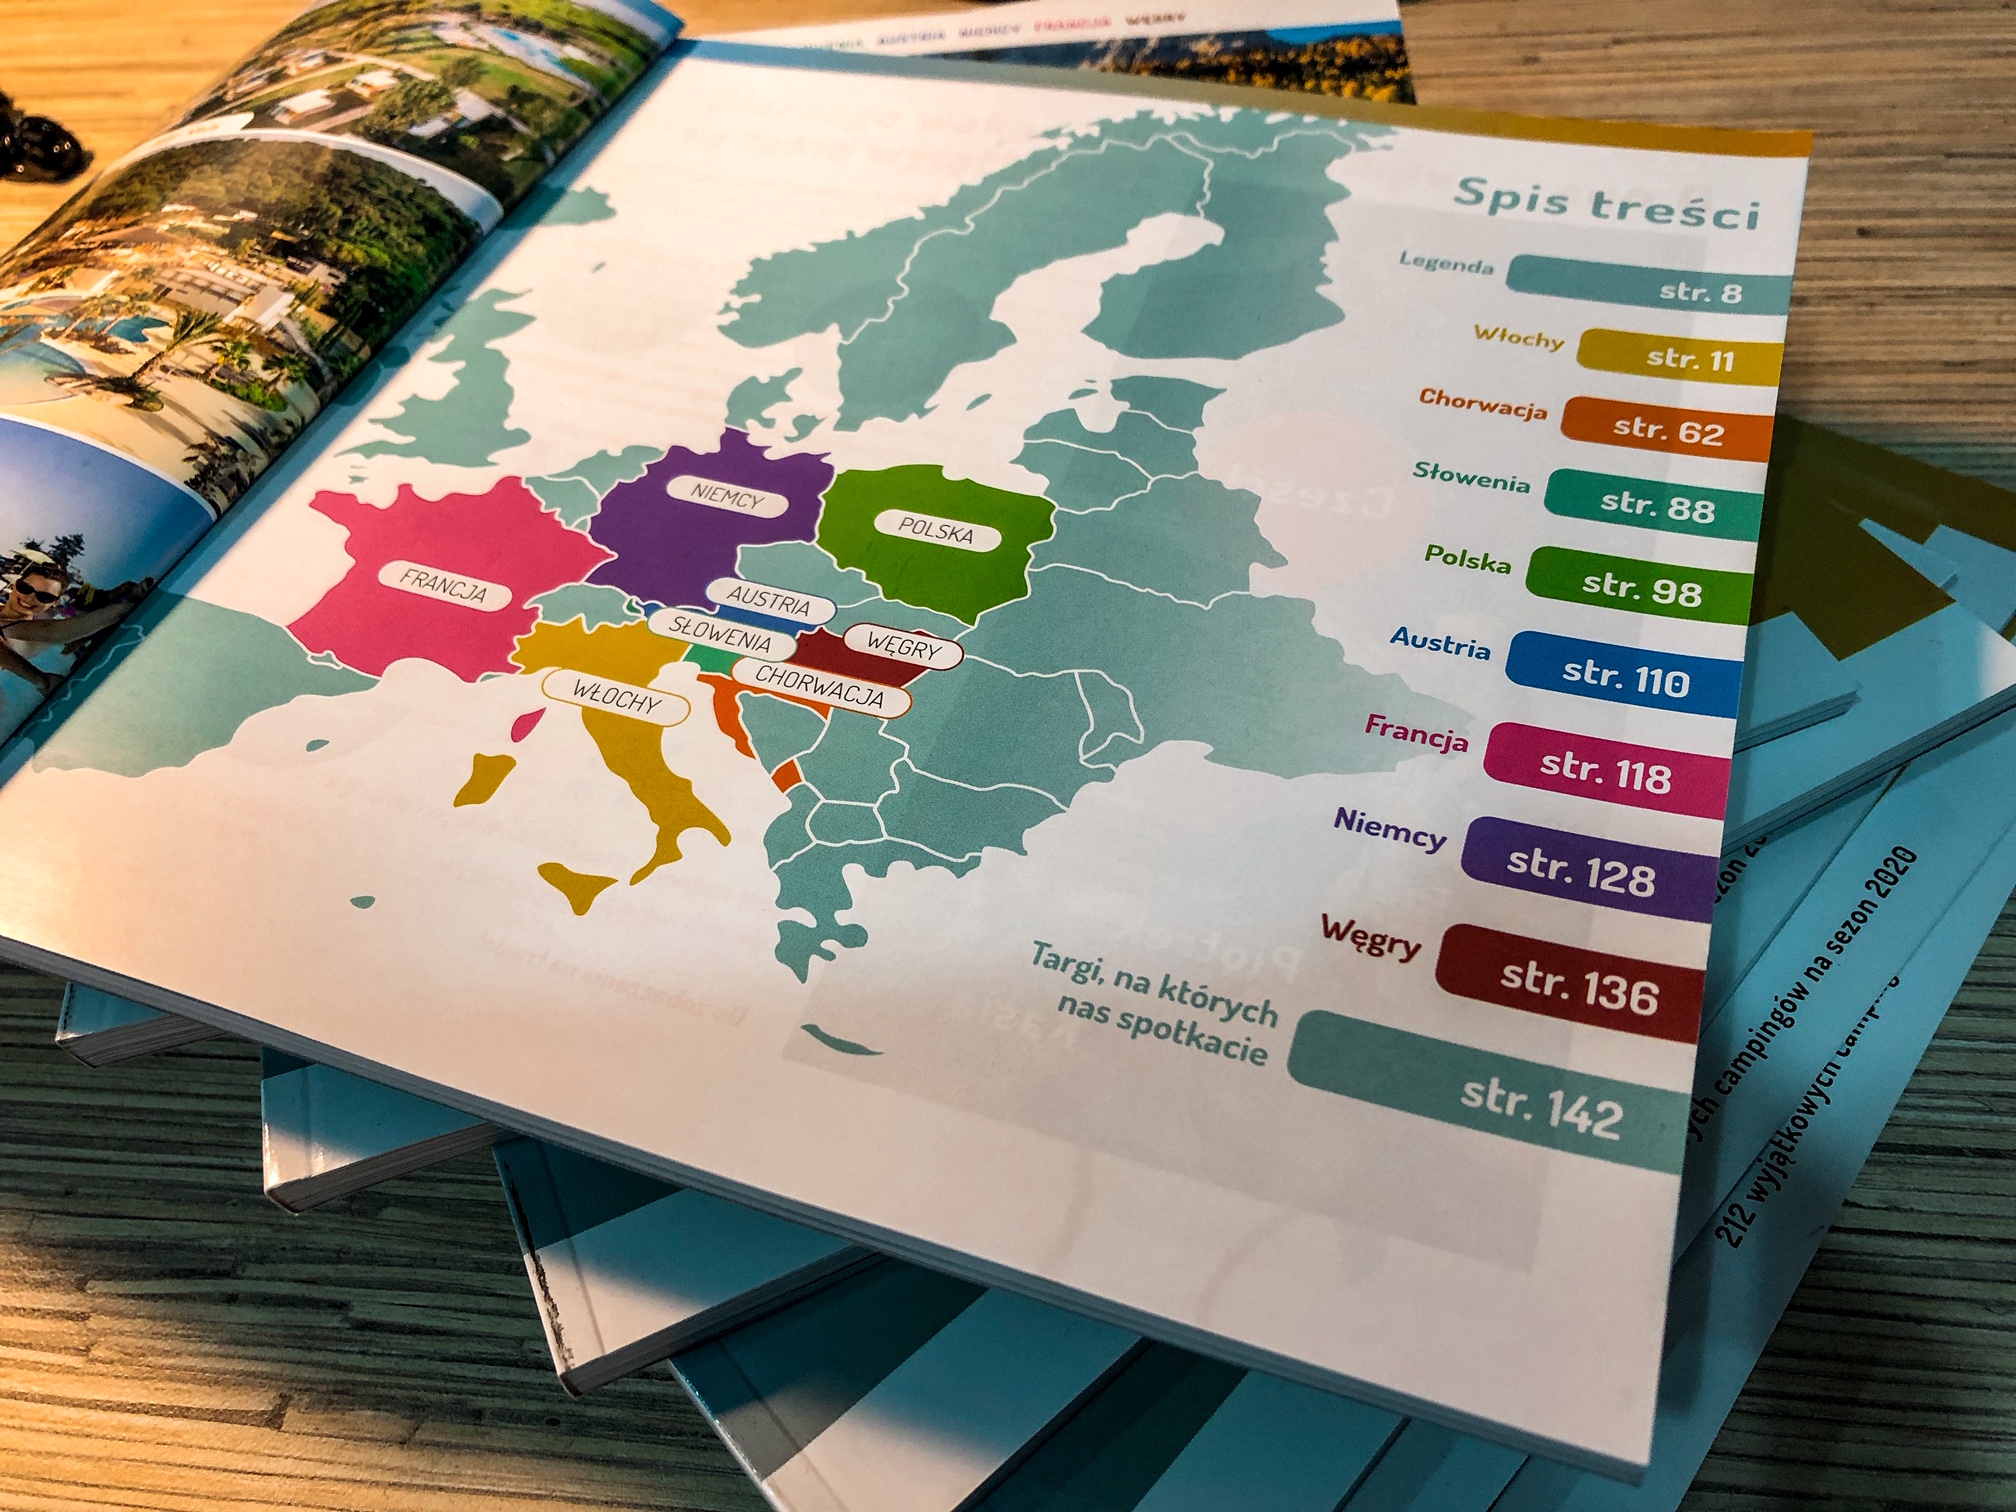 The "Campings of Europe 2020" guide - how to get it?